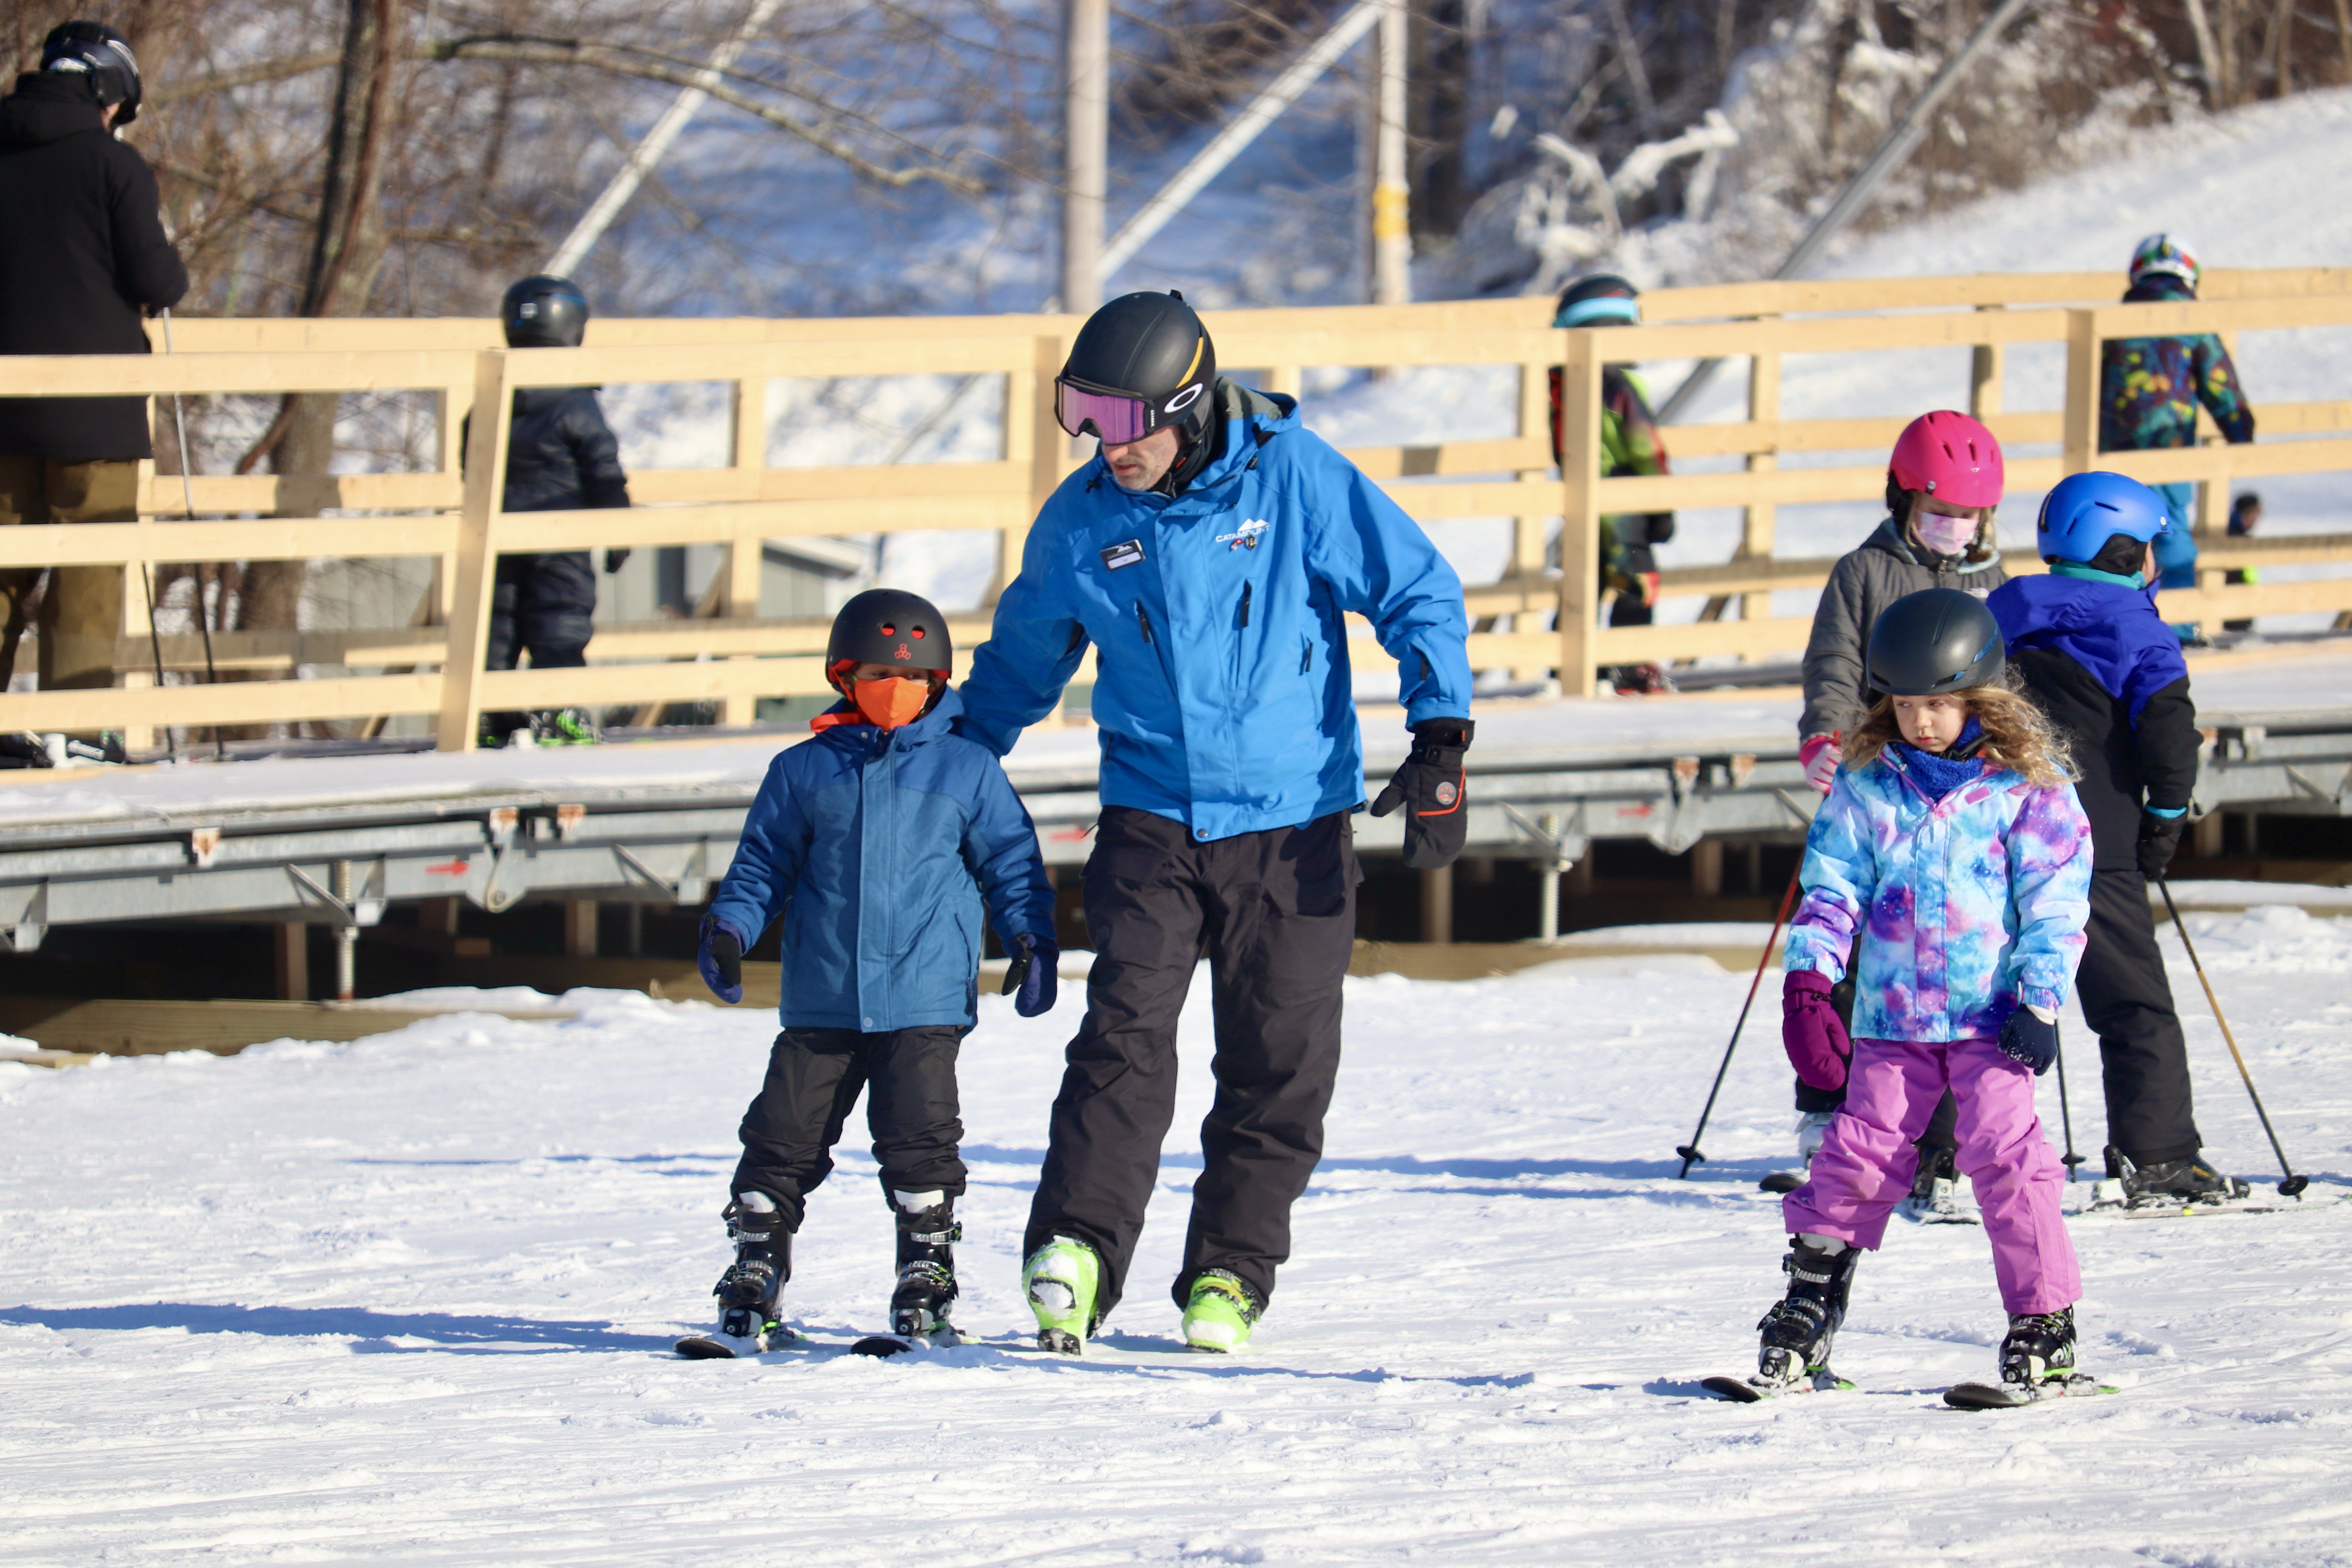 Catamount Snow Sports Instructor guiding child down the learning slope